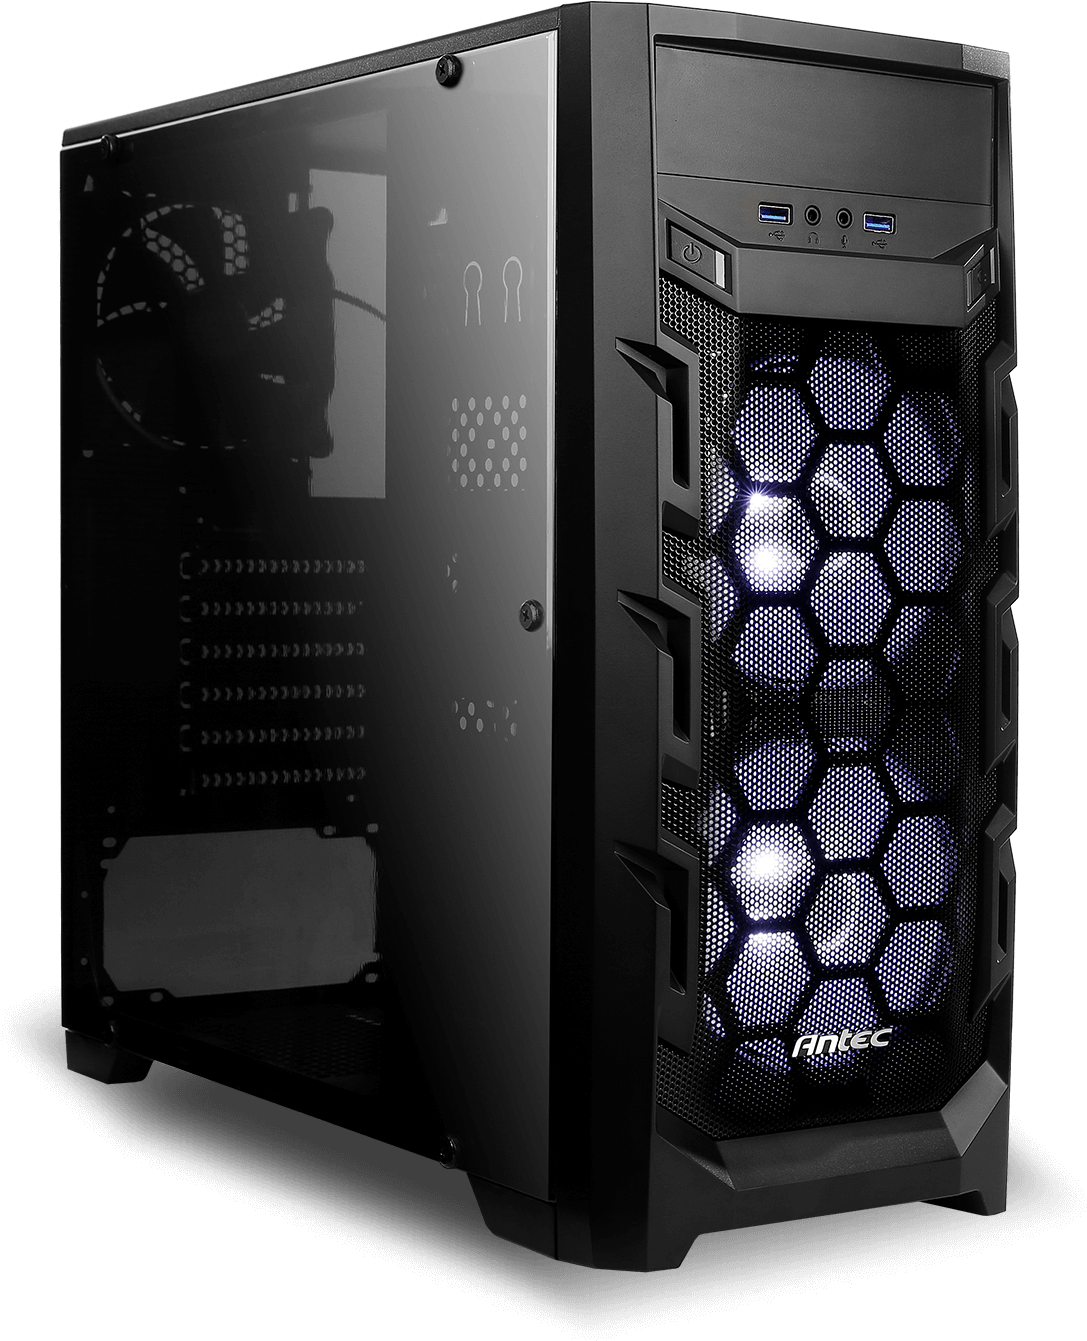 A Black Computer Tower With A Light On The Side